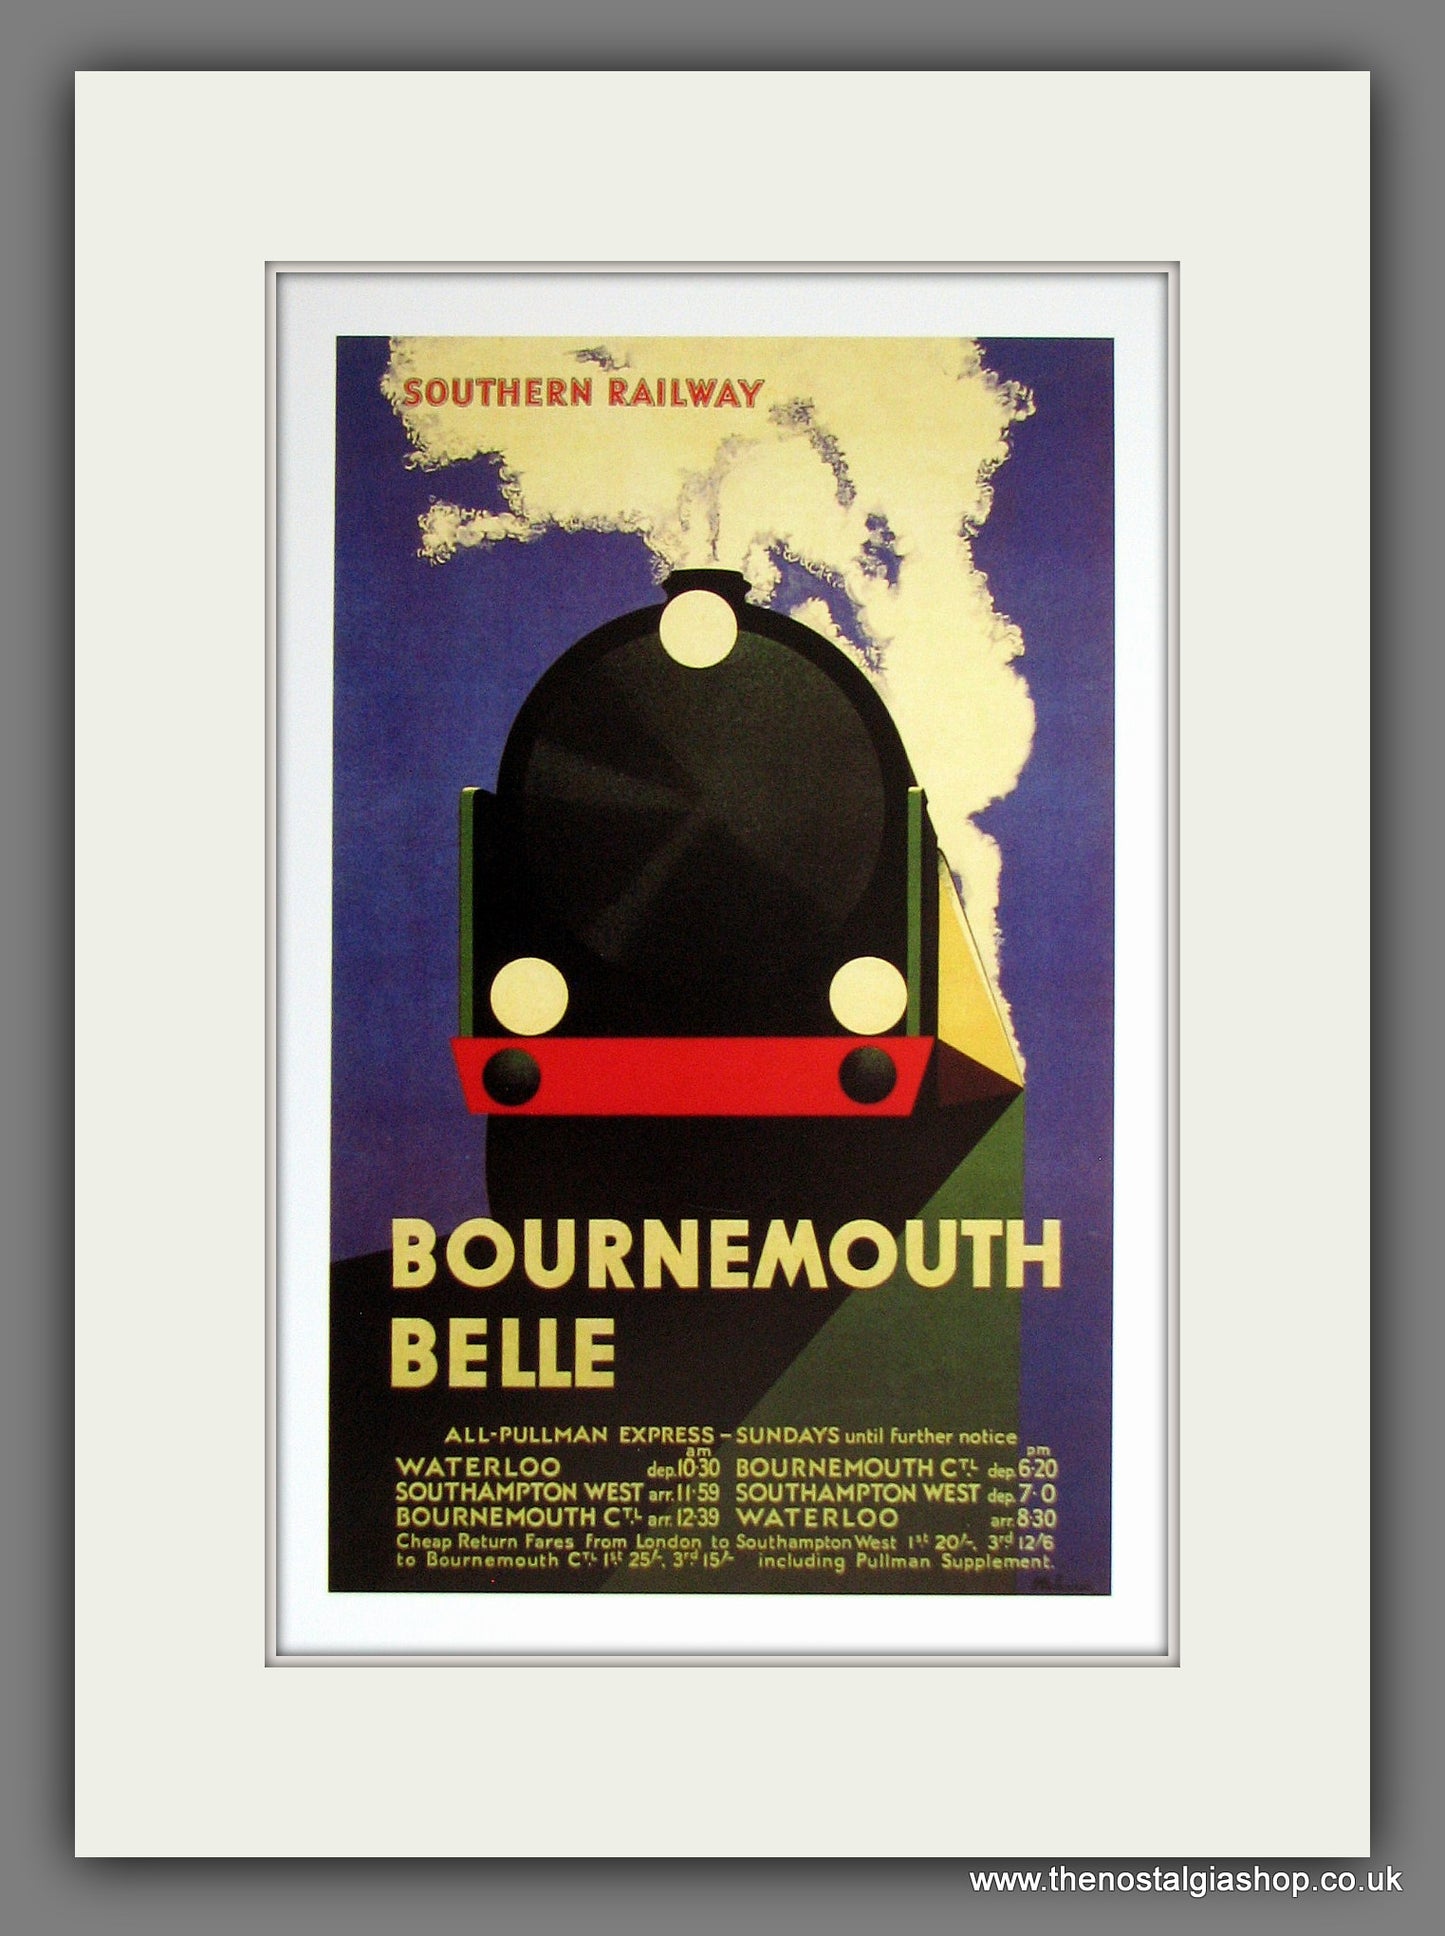 Bournemouth Belle. Southern Railway. Railway Travel Advert. (Reproduction). Mounted Print.